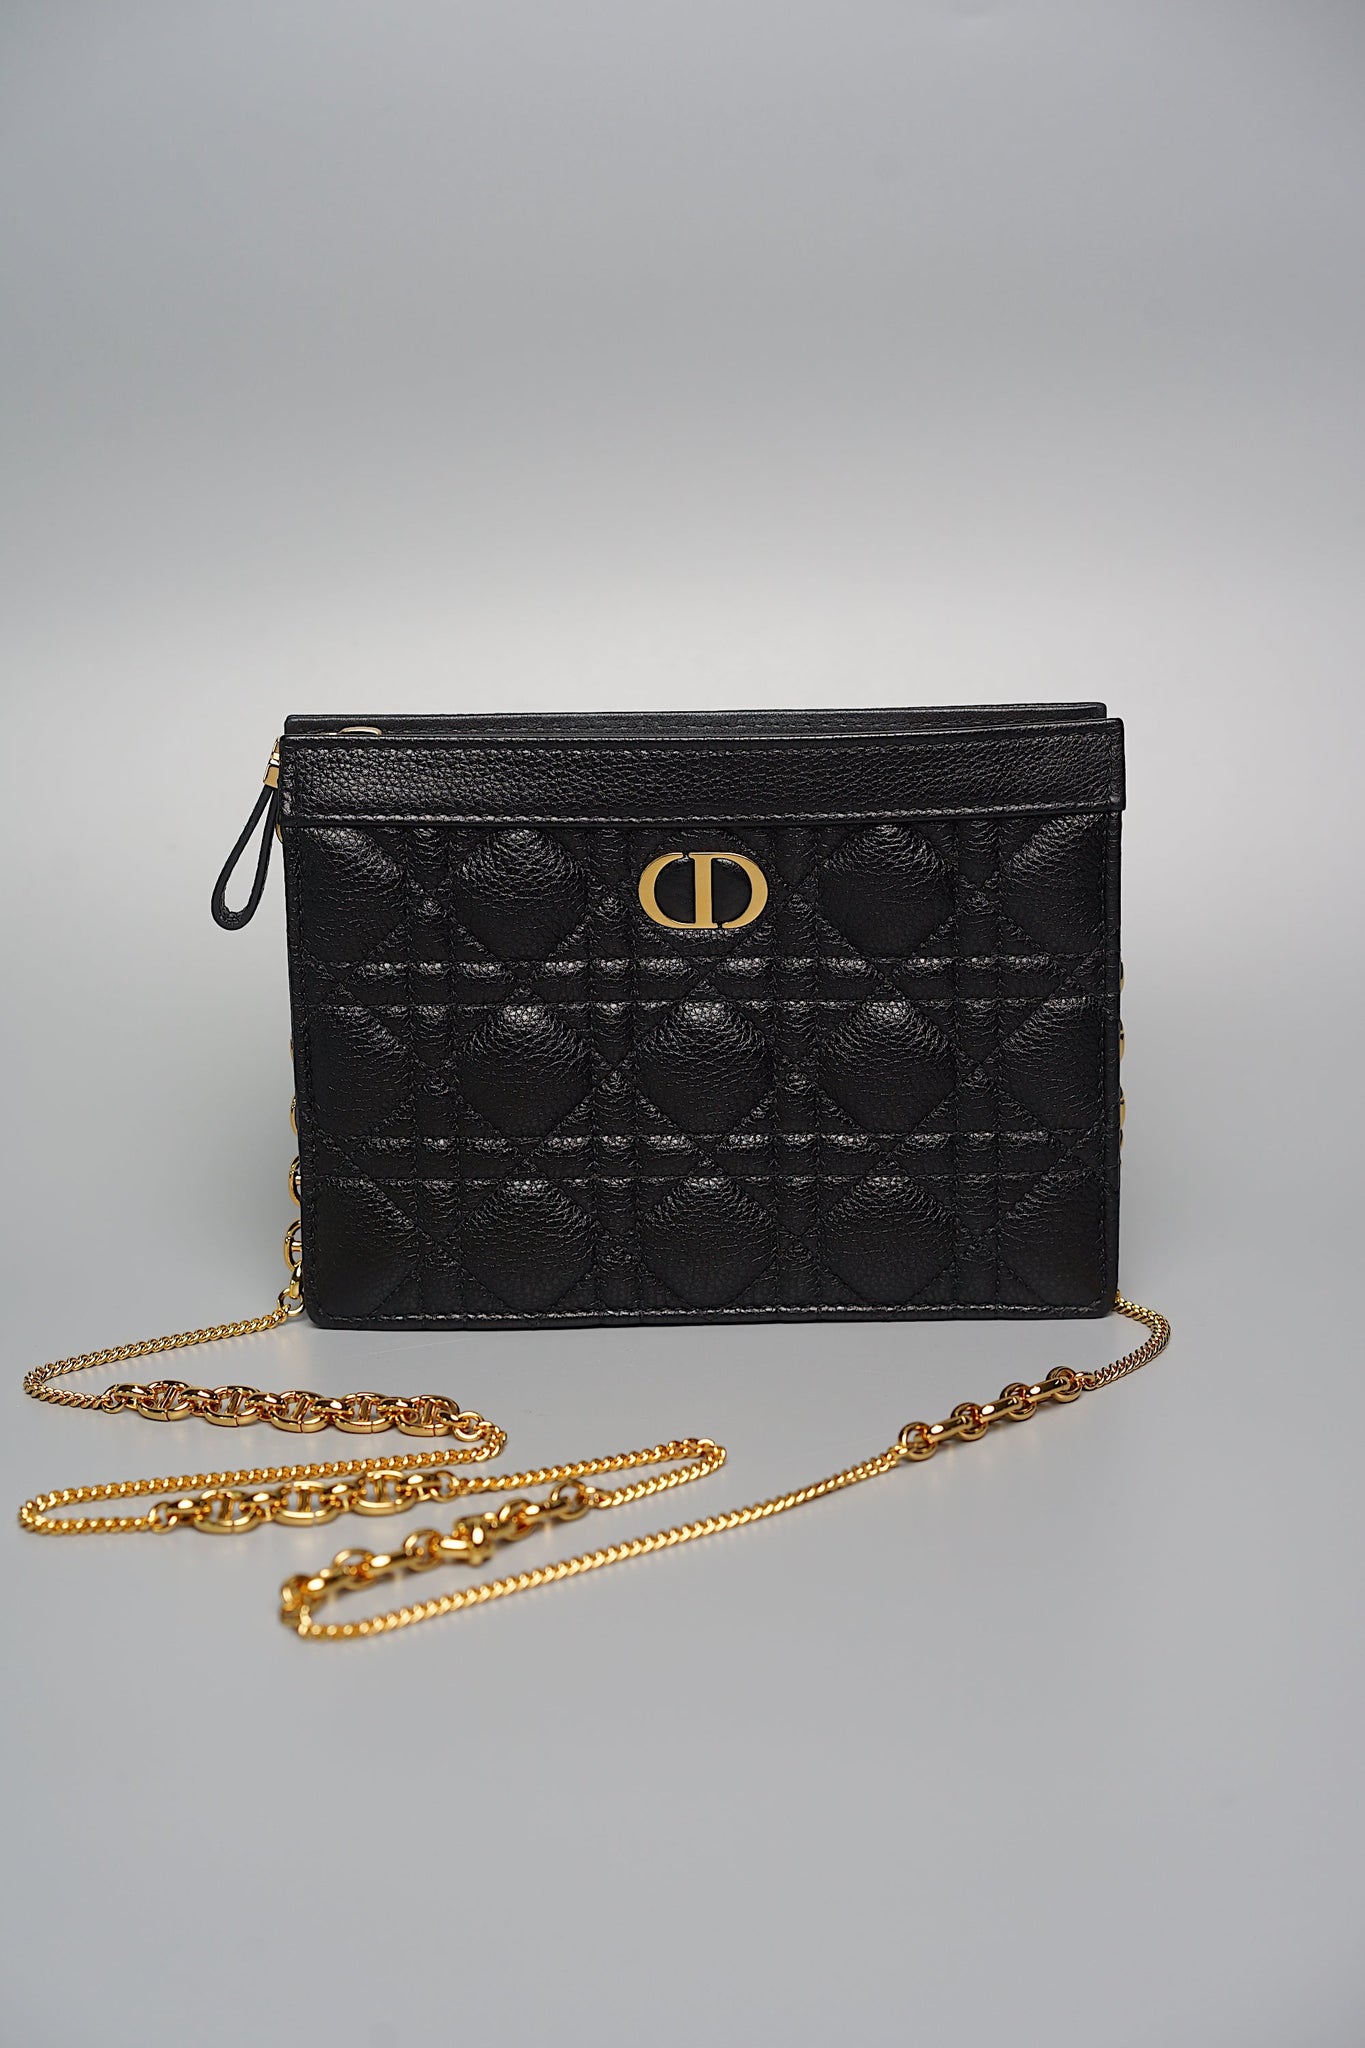 Dior Caro Pouch with Chain in Black (Brand New)